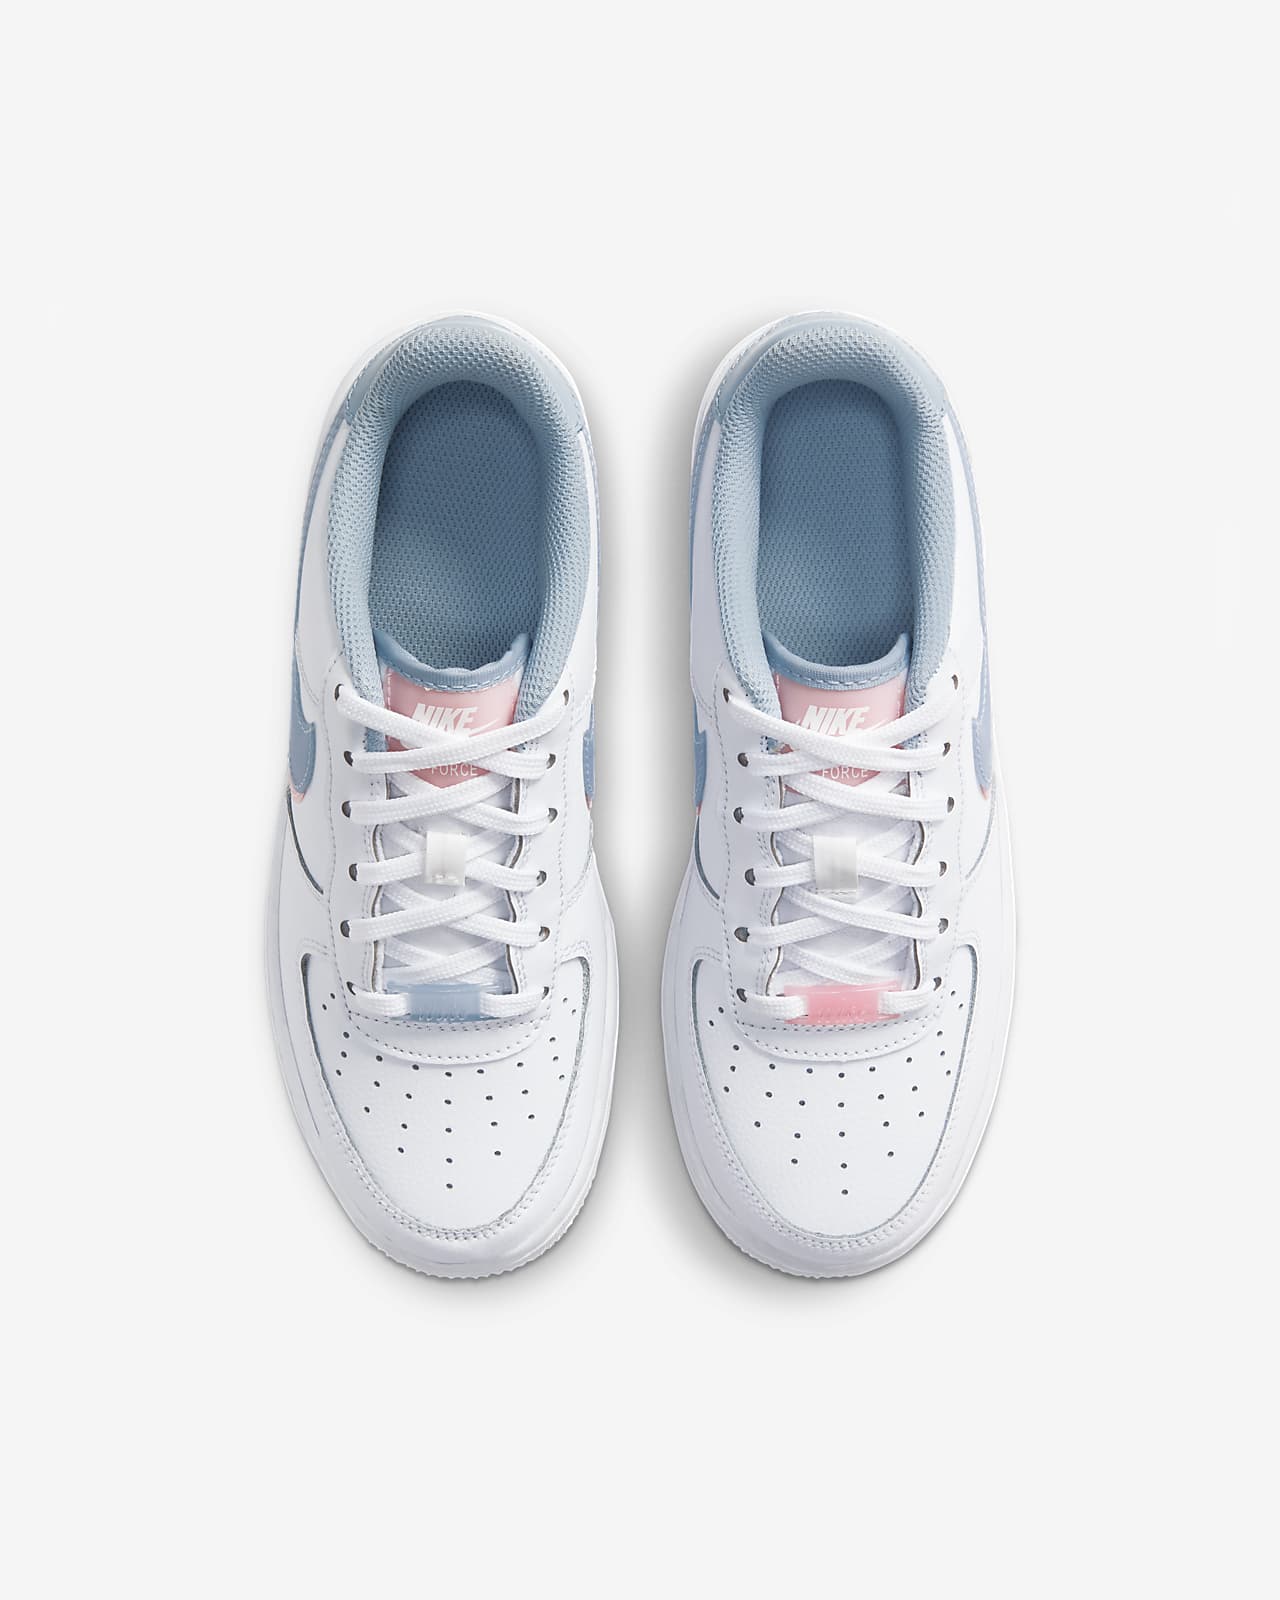 nike air force 1 lv8 junior trainers - white/blue/red